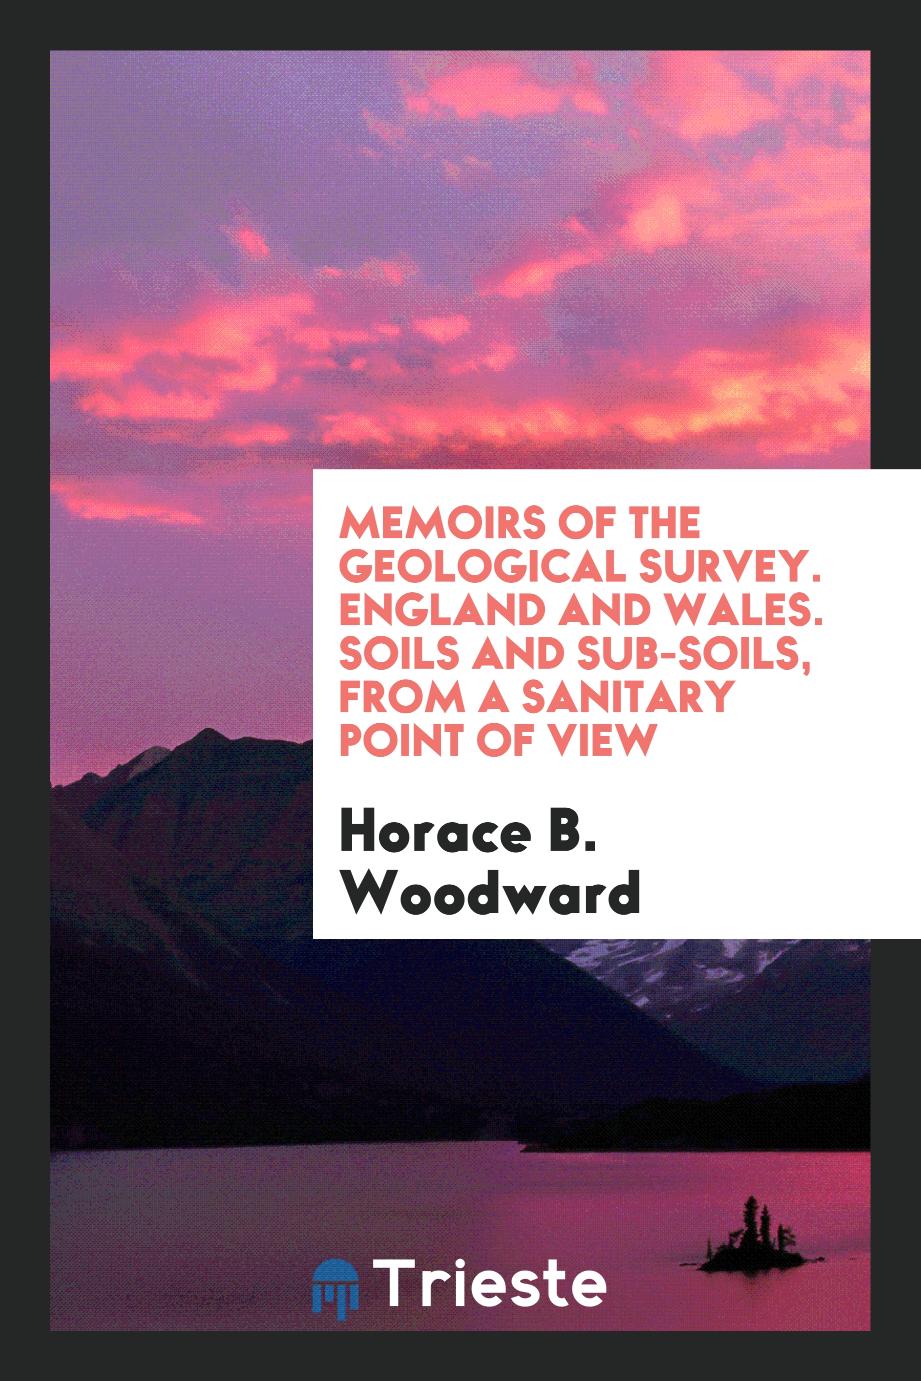 Memoirs of the Geological Survey. England and Wales. Soils and Sub-soils, from a sanitary point of view